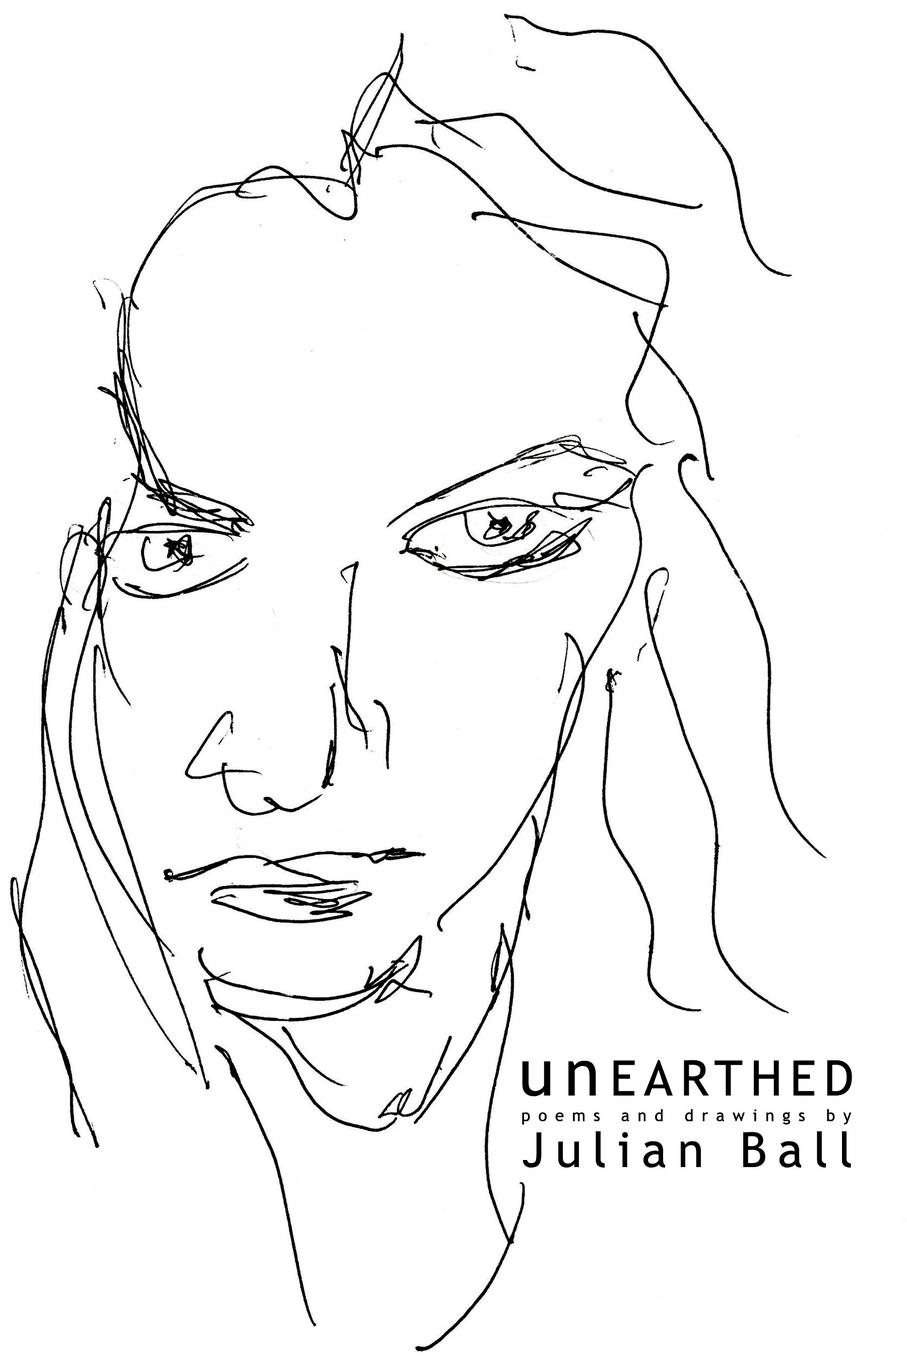 Unearthed - Ball, Julian